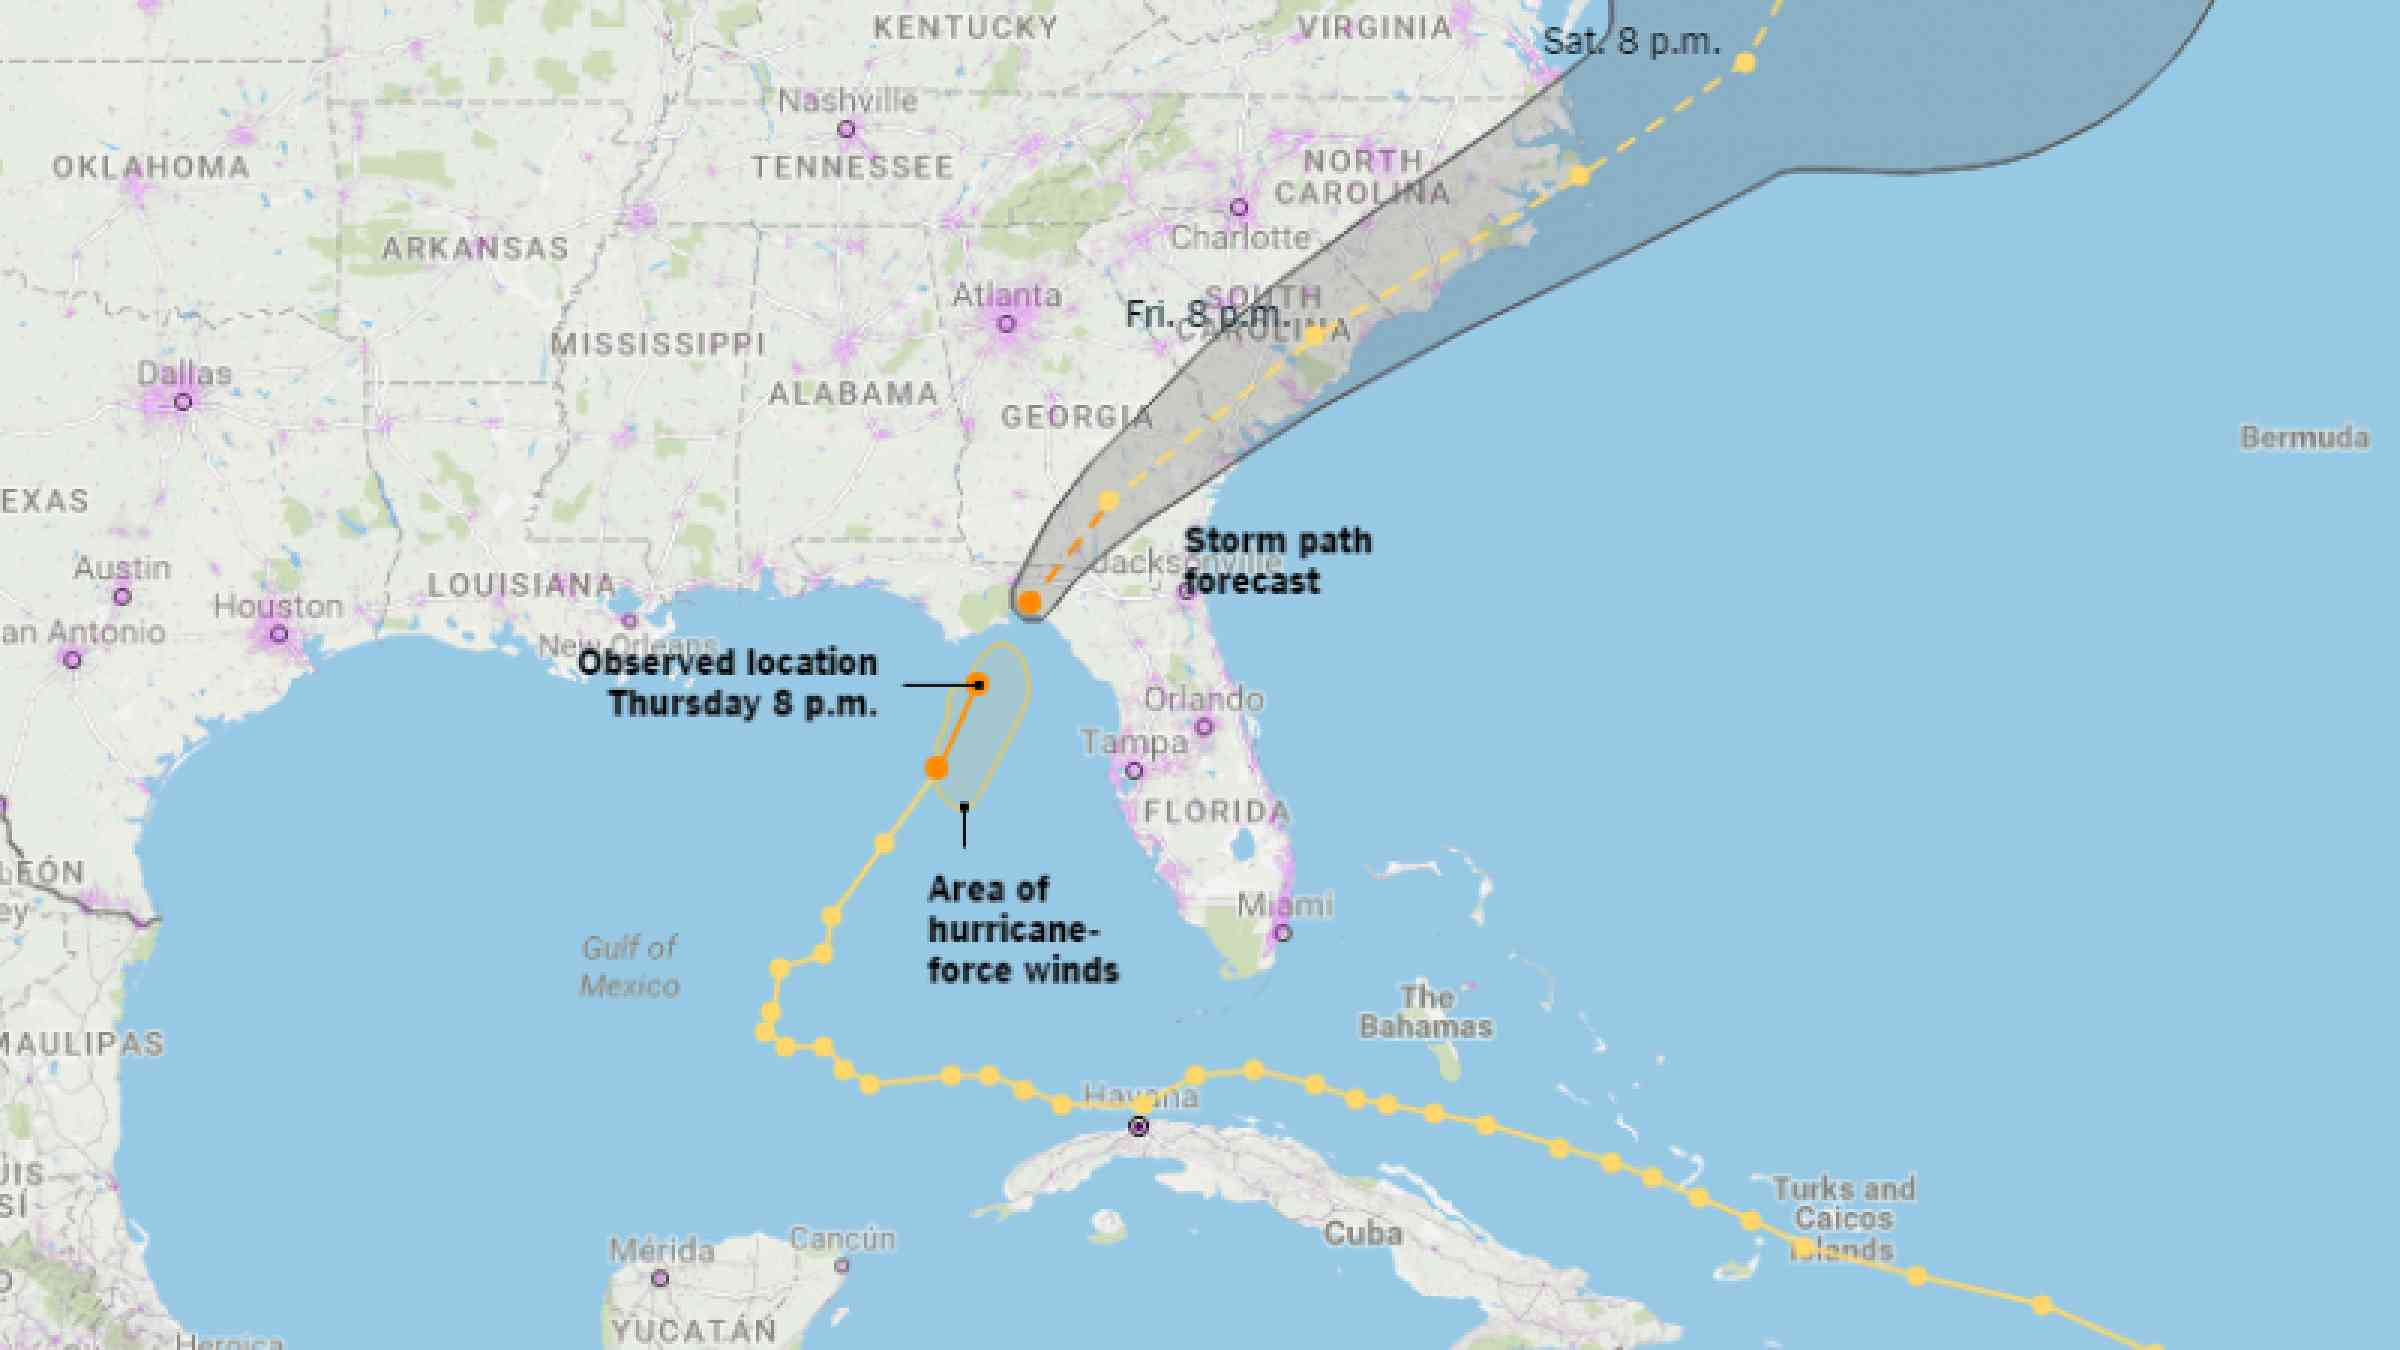 The storm path for Hurricane Hermine which made landfall in Florida earlier today